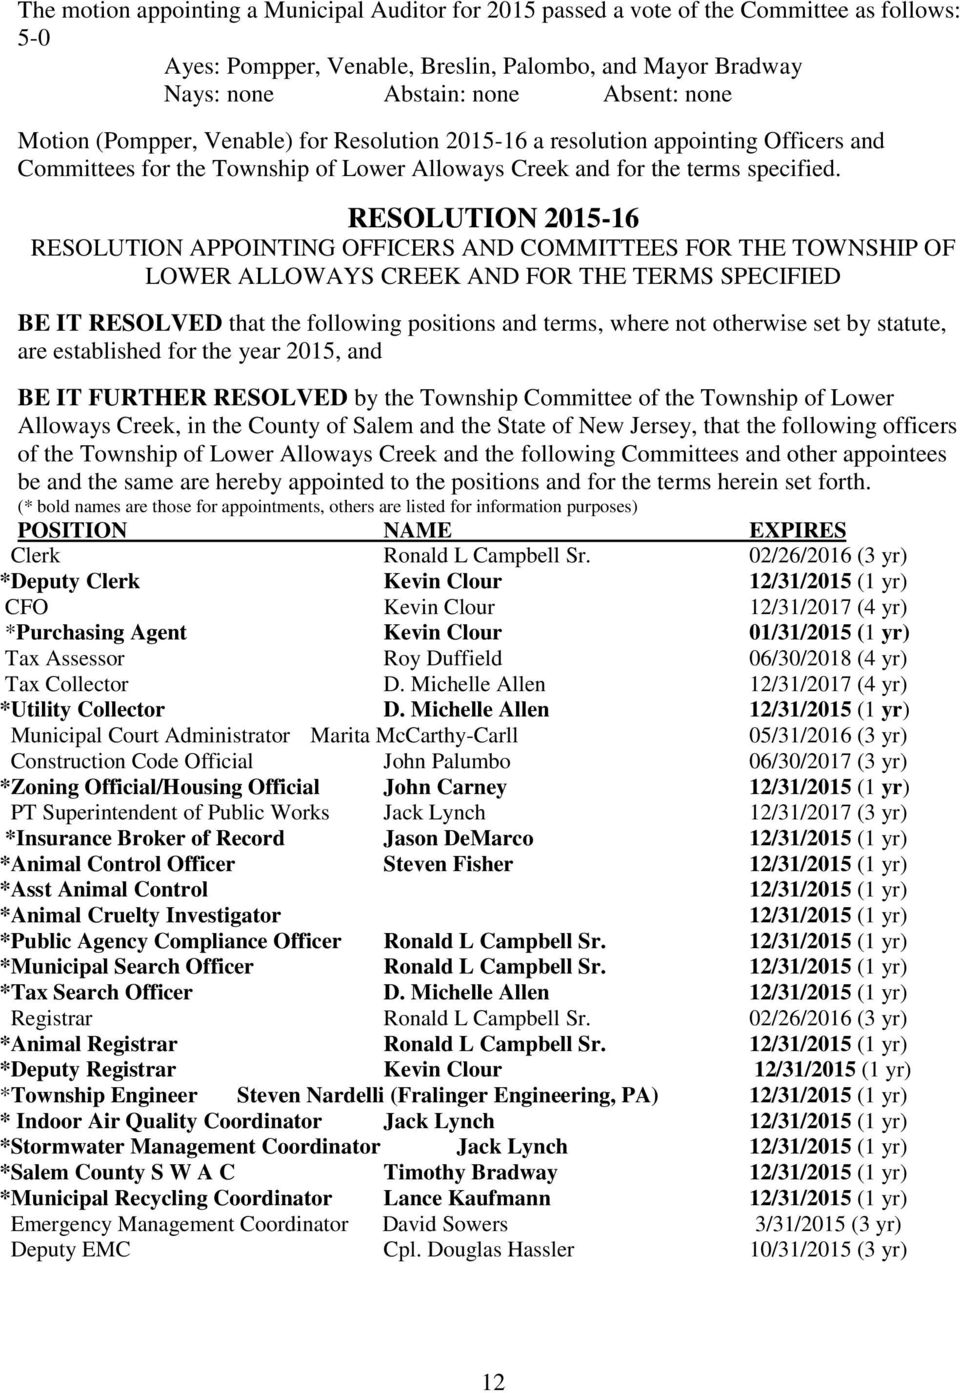 RESOLUTION 2015-16 RESOLUTION APPOINTING OFFICERS AND COMMITTEES FOR THE TOWNSHIP OF LOWER ALLOWAYS CREEK AND FOR THE TERMS SPECIFIED BE IT RESOLVED that the following positions and terms, where not